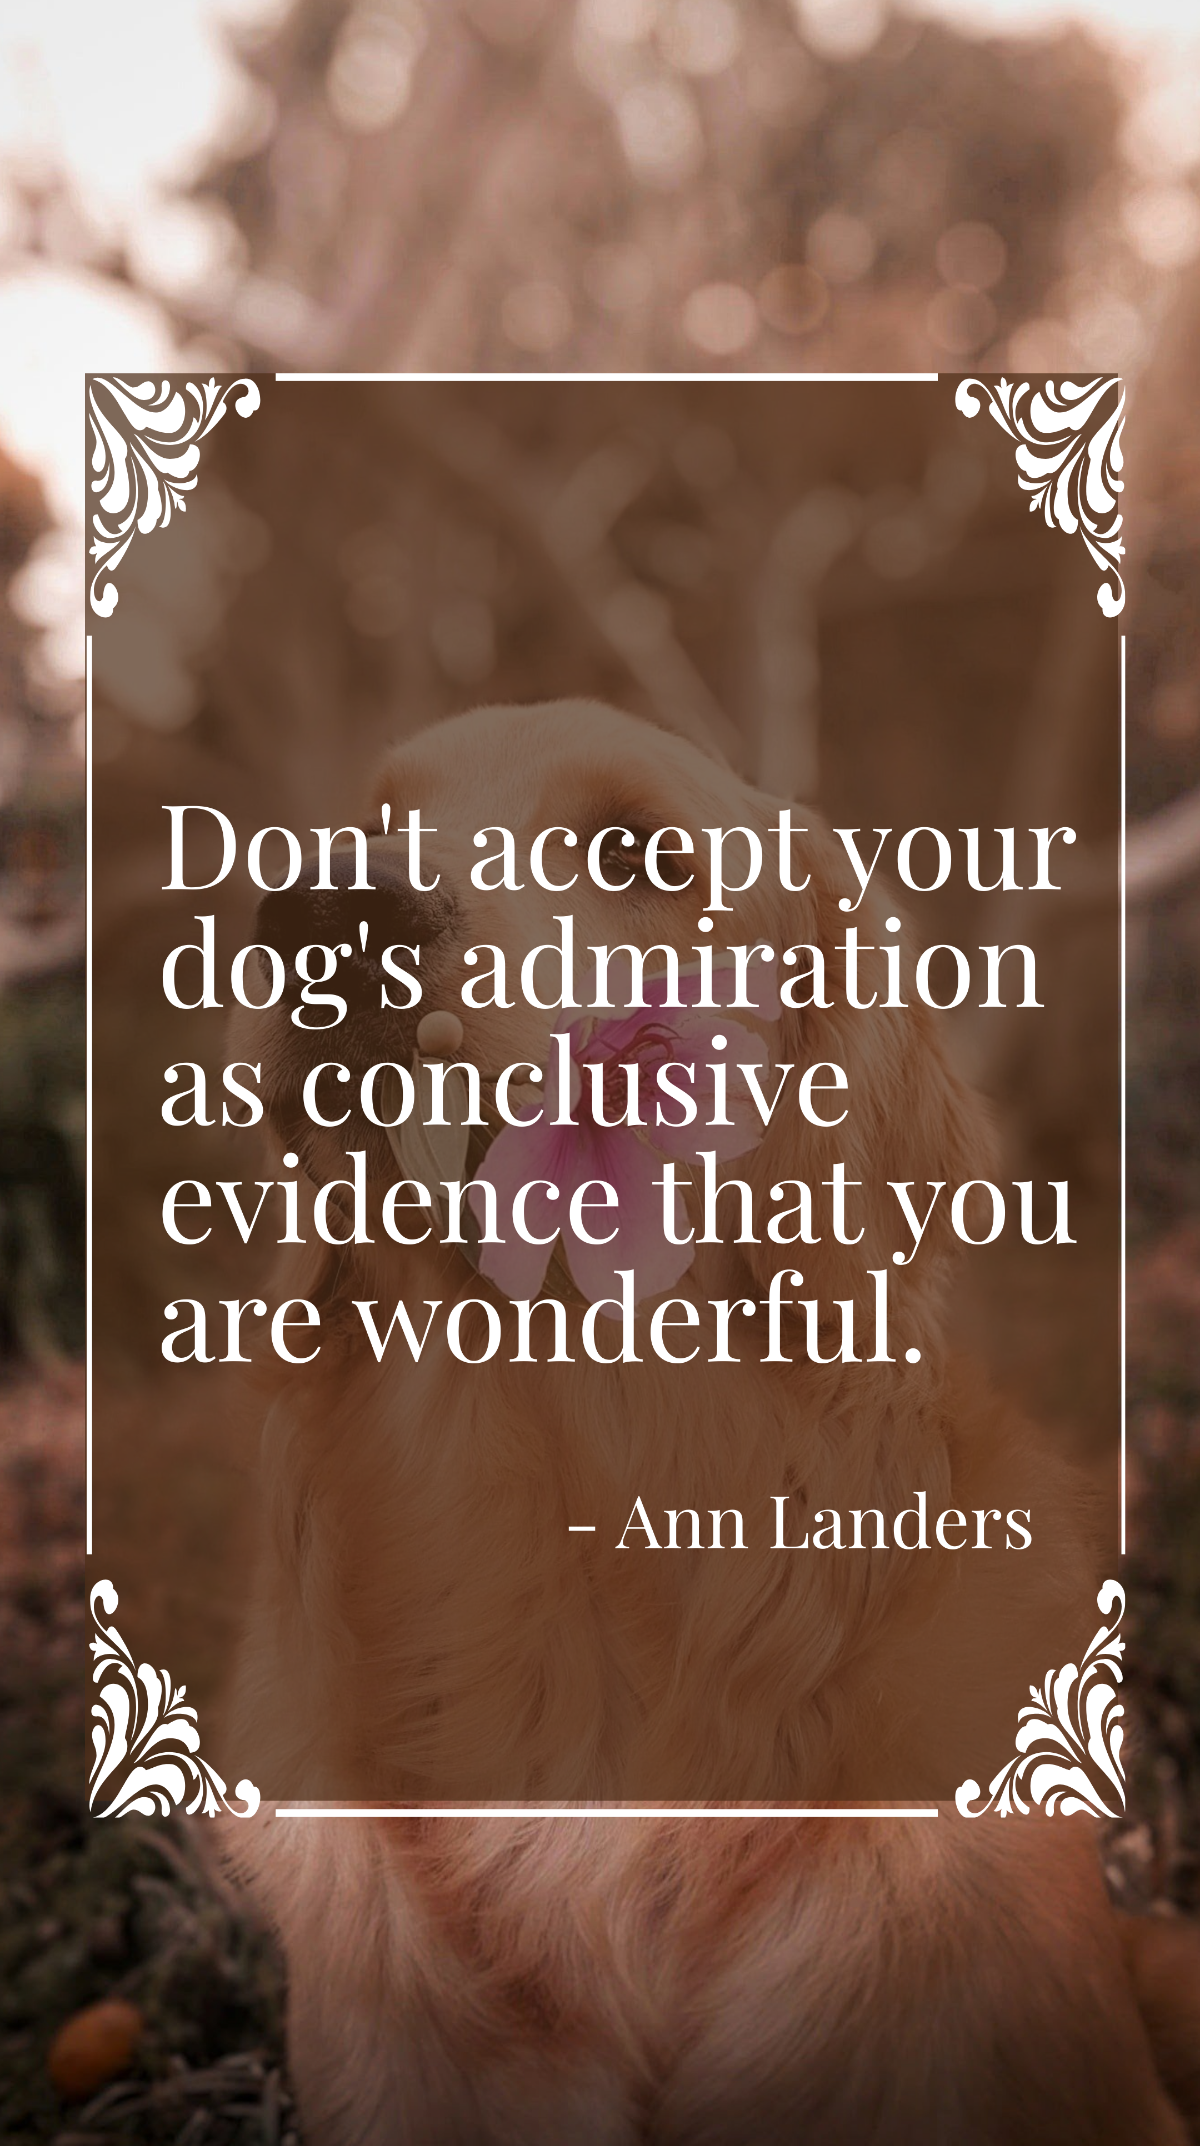 Free Ann Landers - Don't accept your dog's admiration as conclusive evidence that you are wonderful. Template